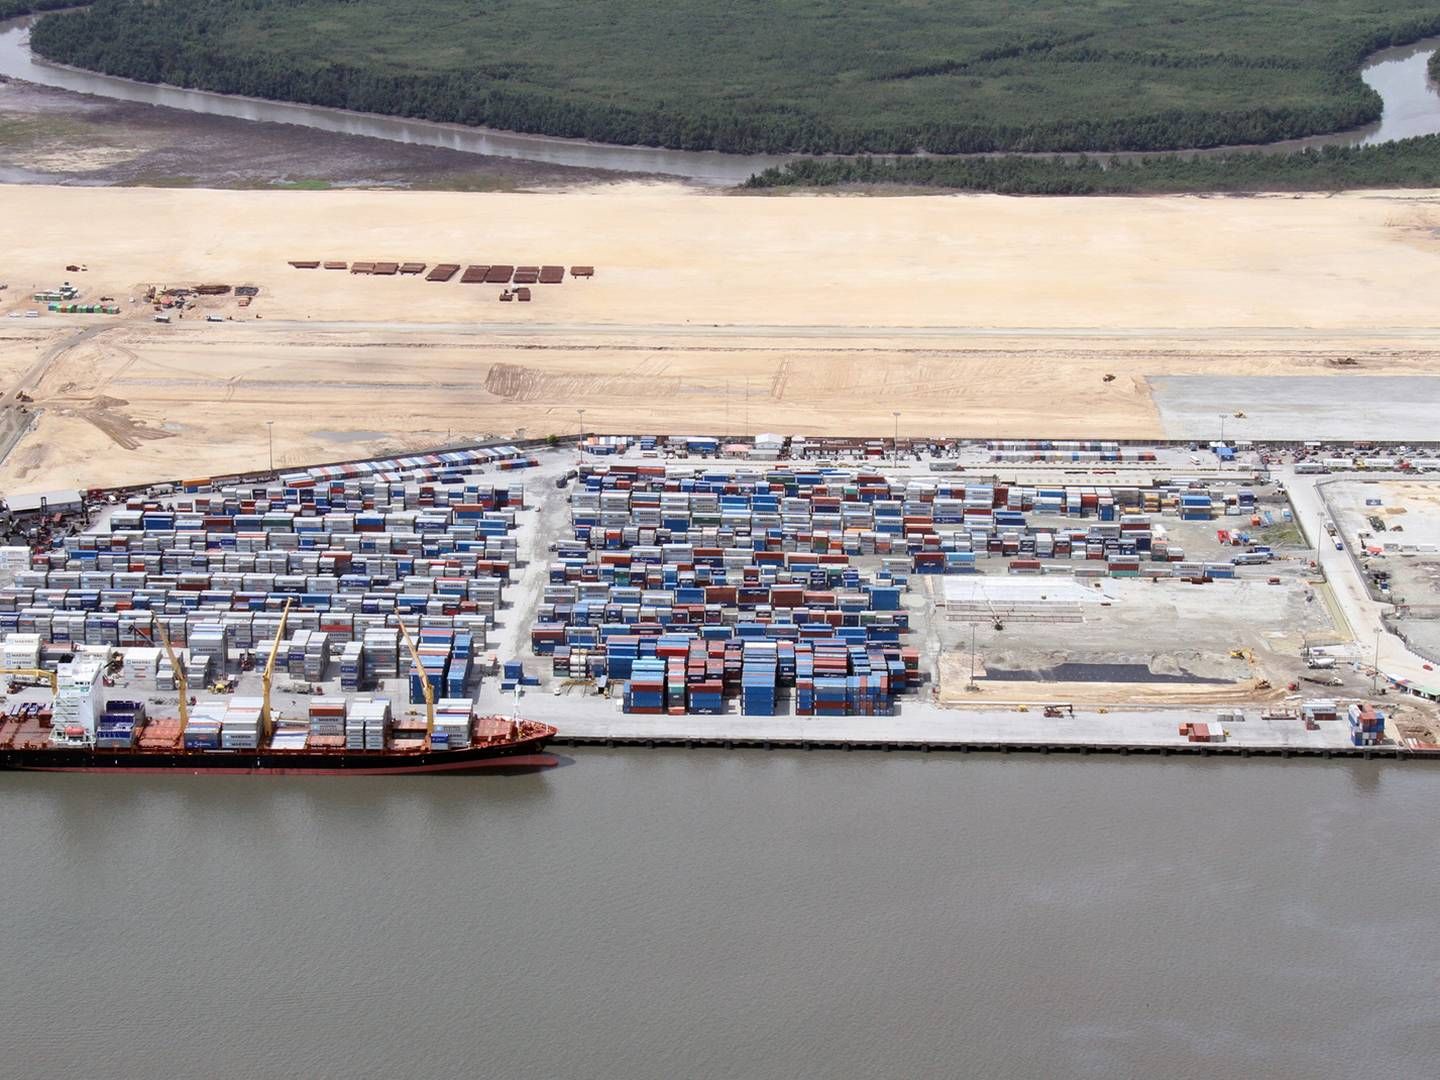 The port in Onne, Nigeria, where APM Terminals is present. | Photo: APM Terminas